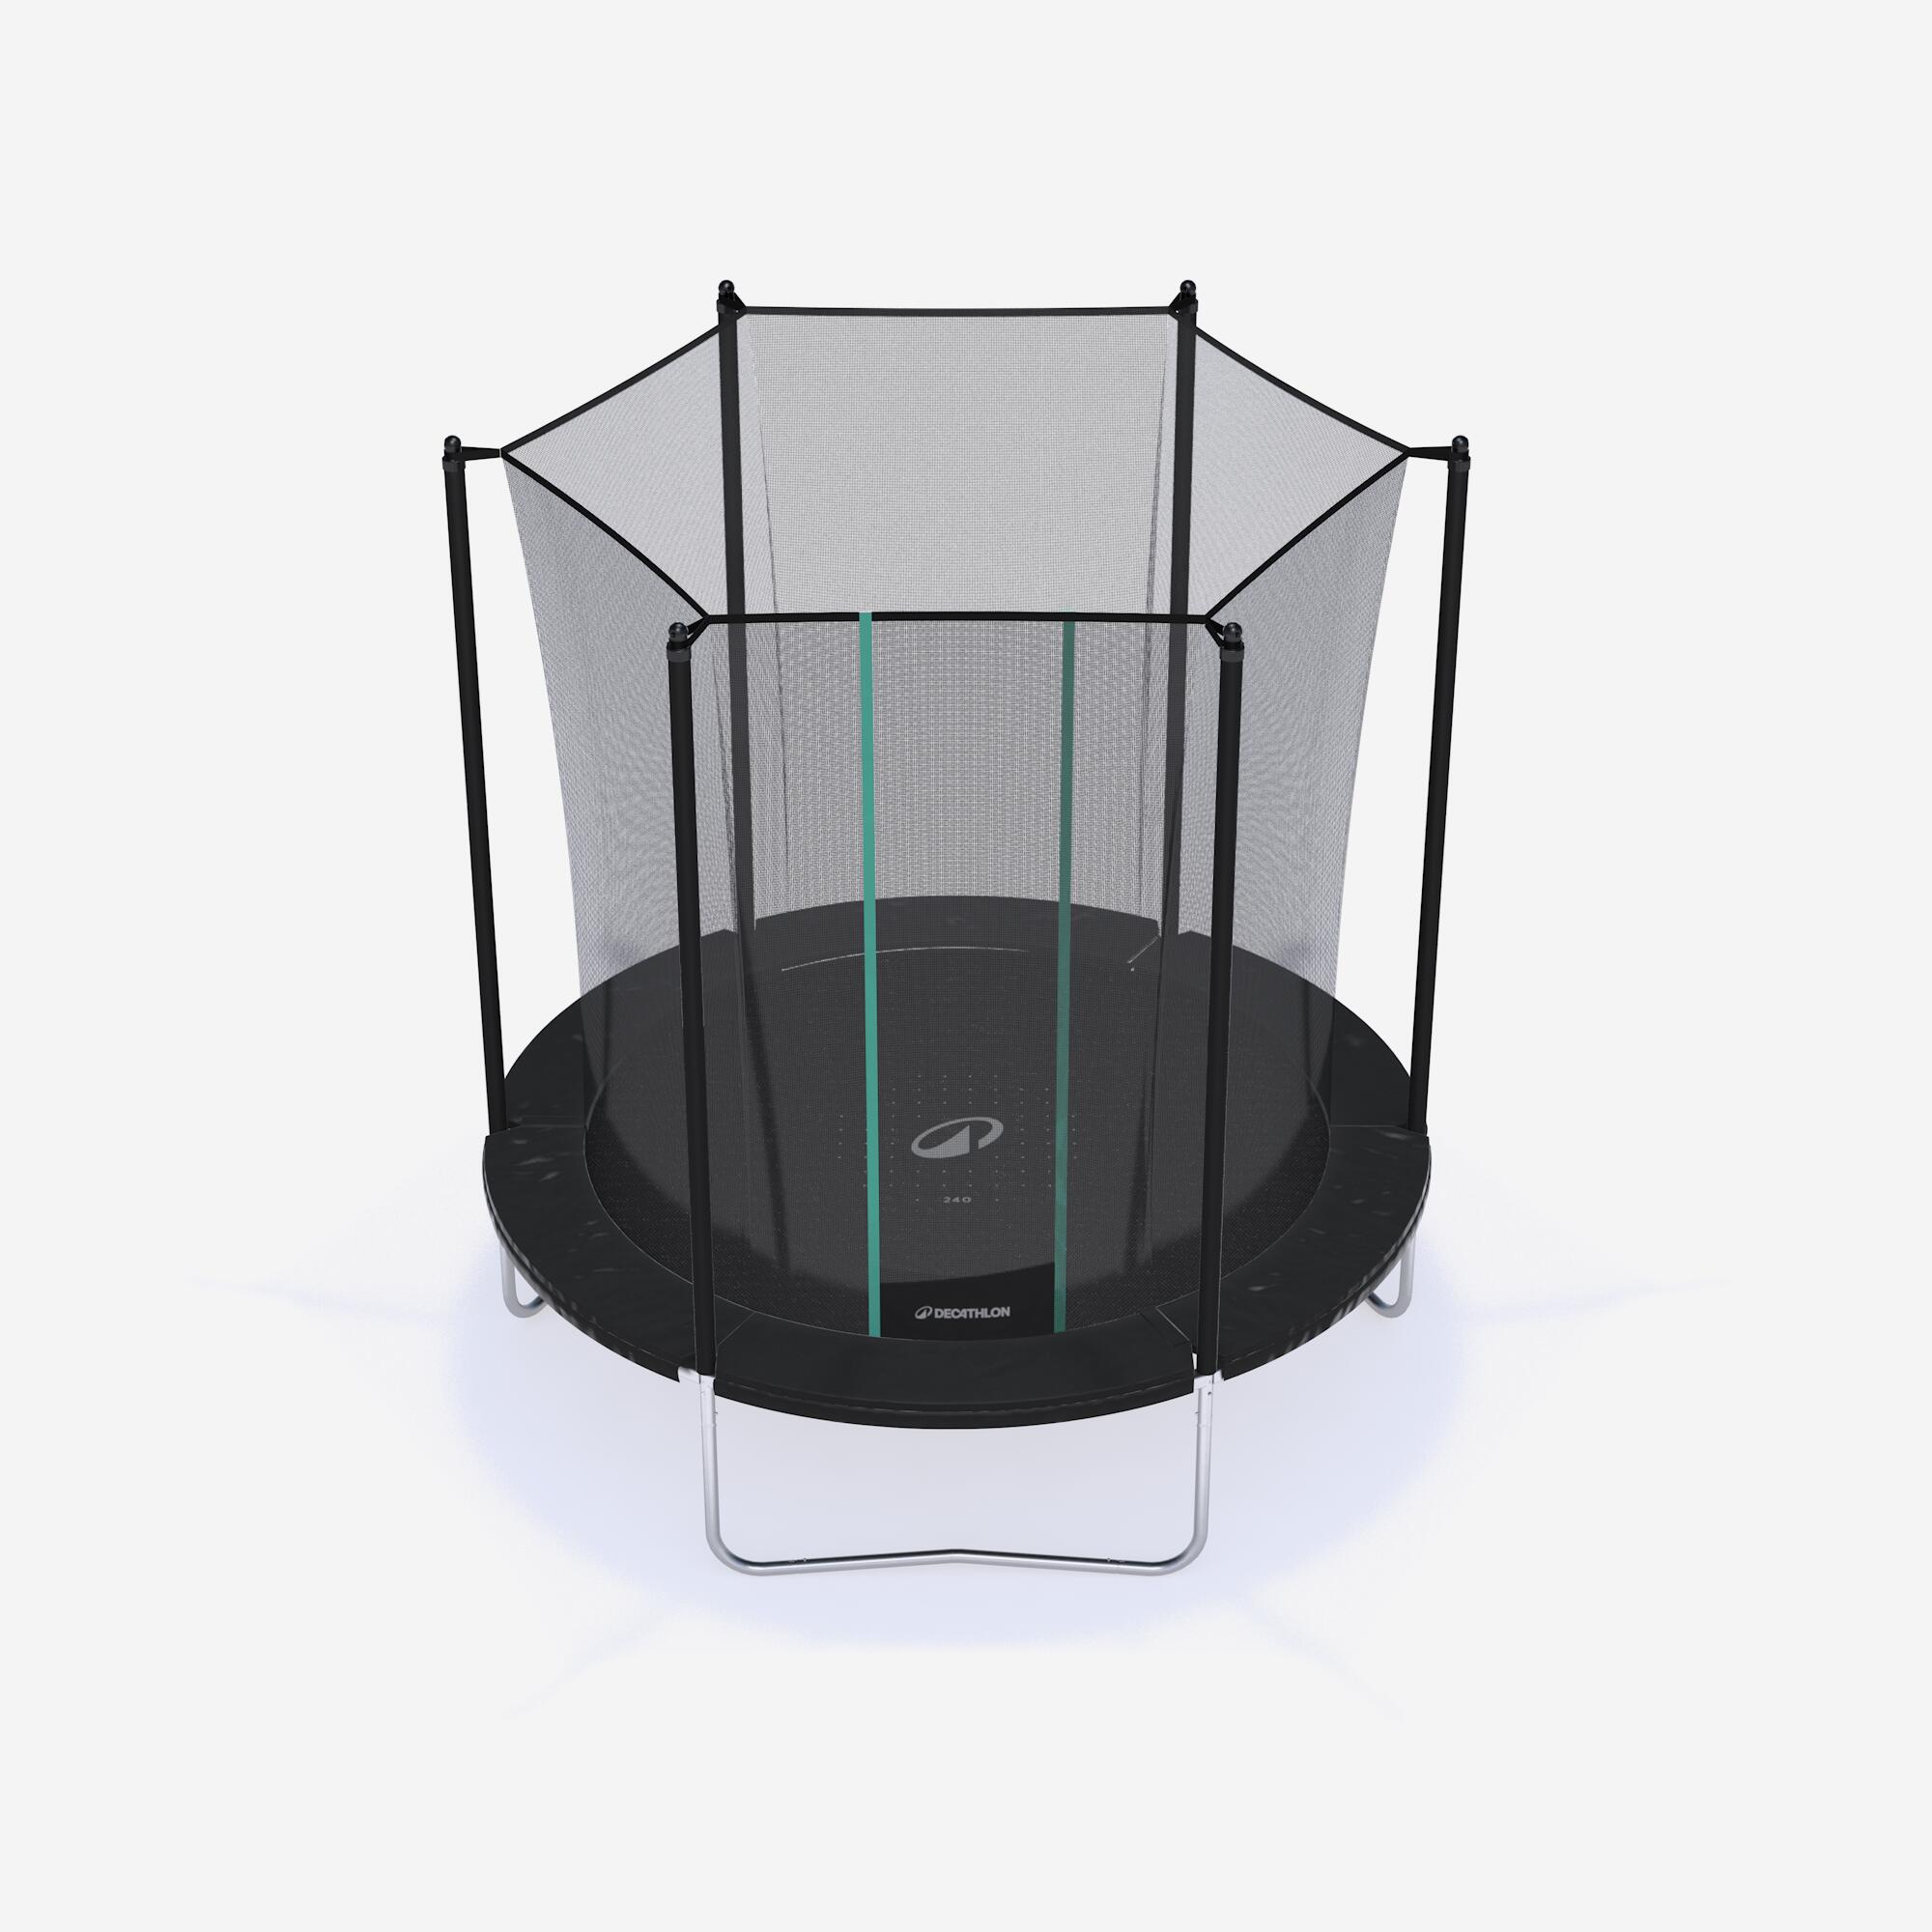 Trampoline 240 with Netting - Tool-Free Design 1/6